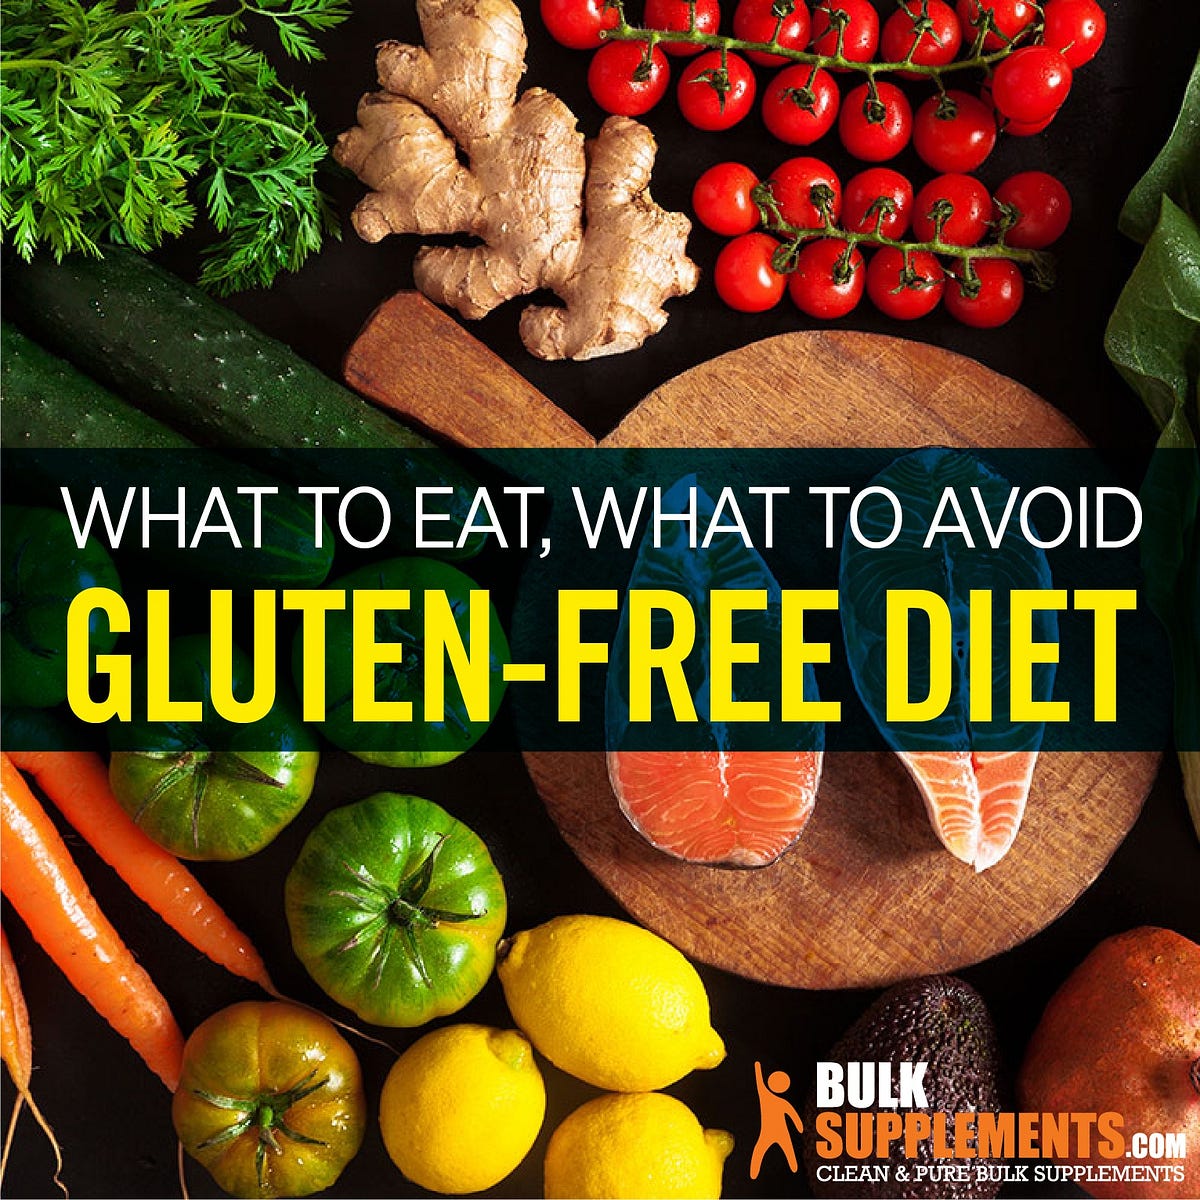 Gluten-Free Diet: What to eat, what to avoid | BulkSupplements.com | by